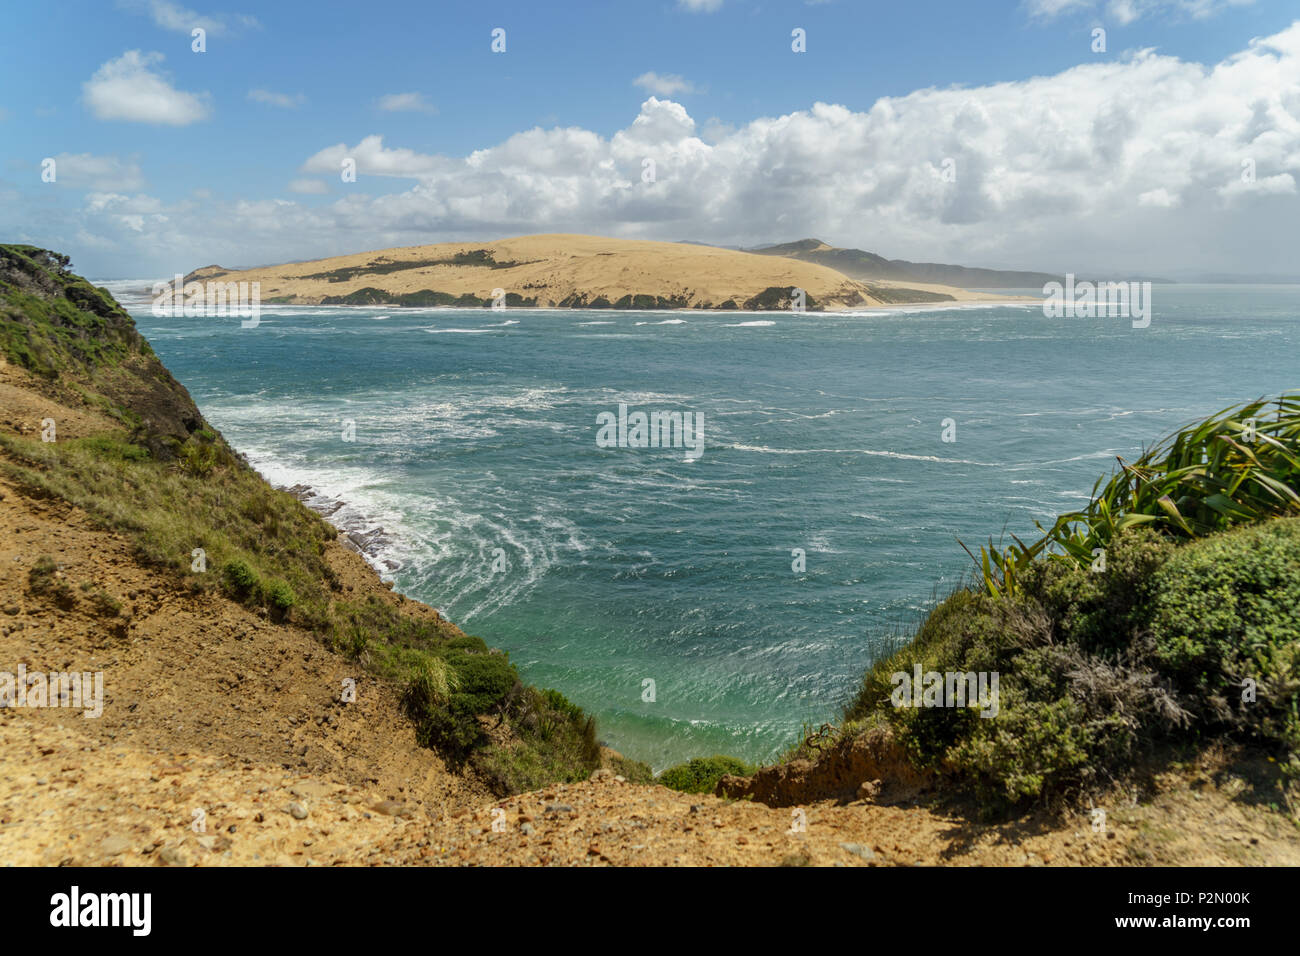 view of from coast on island in ocean, Omapere, New Zealand Stock Photo